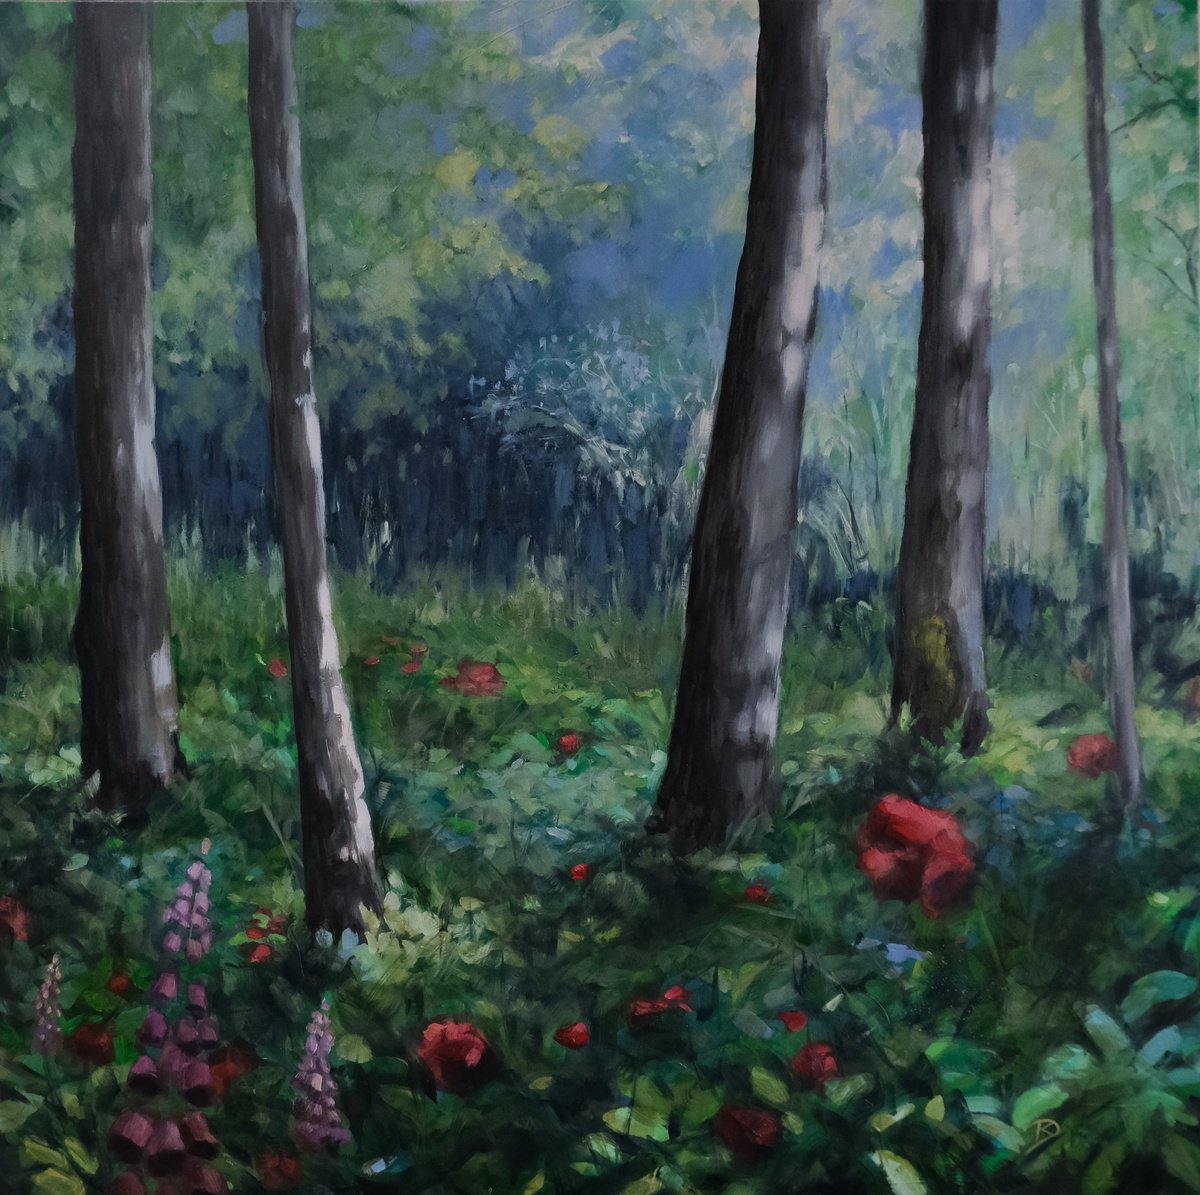 within the woodland by Kerry Lisa Davies